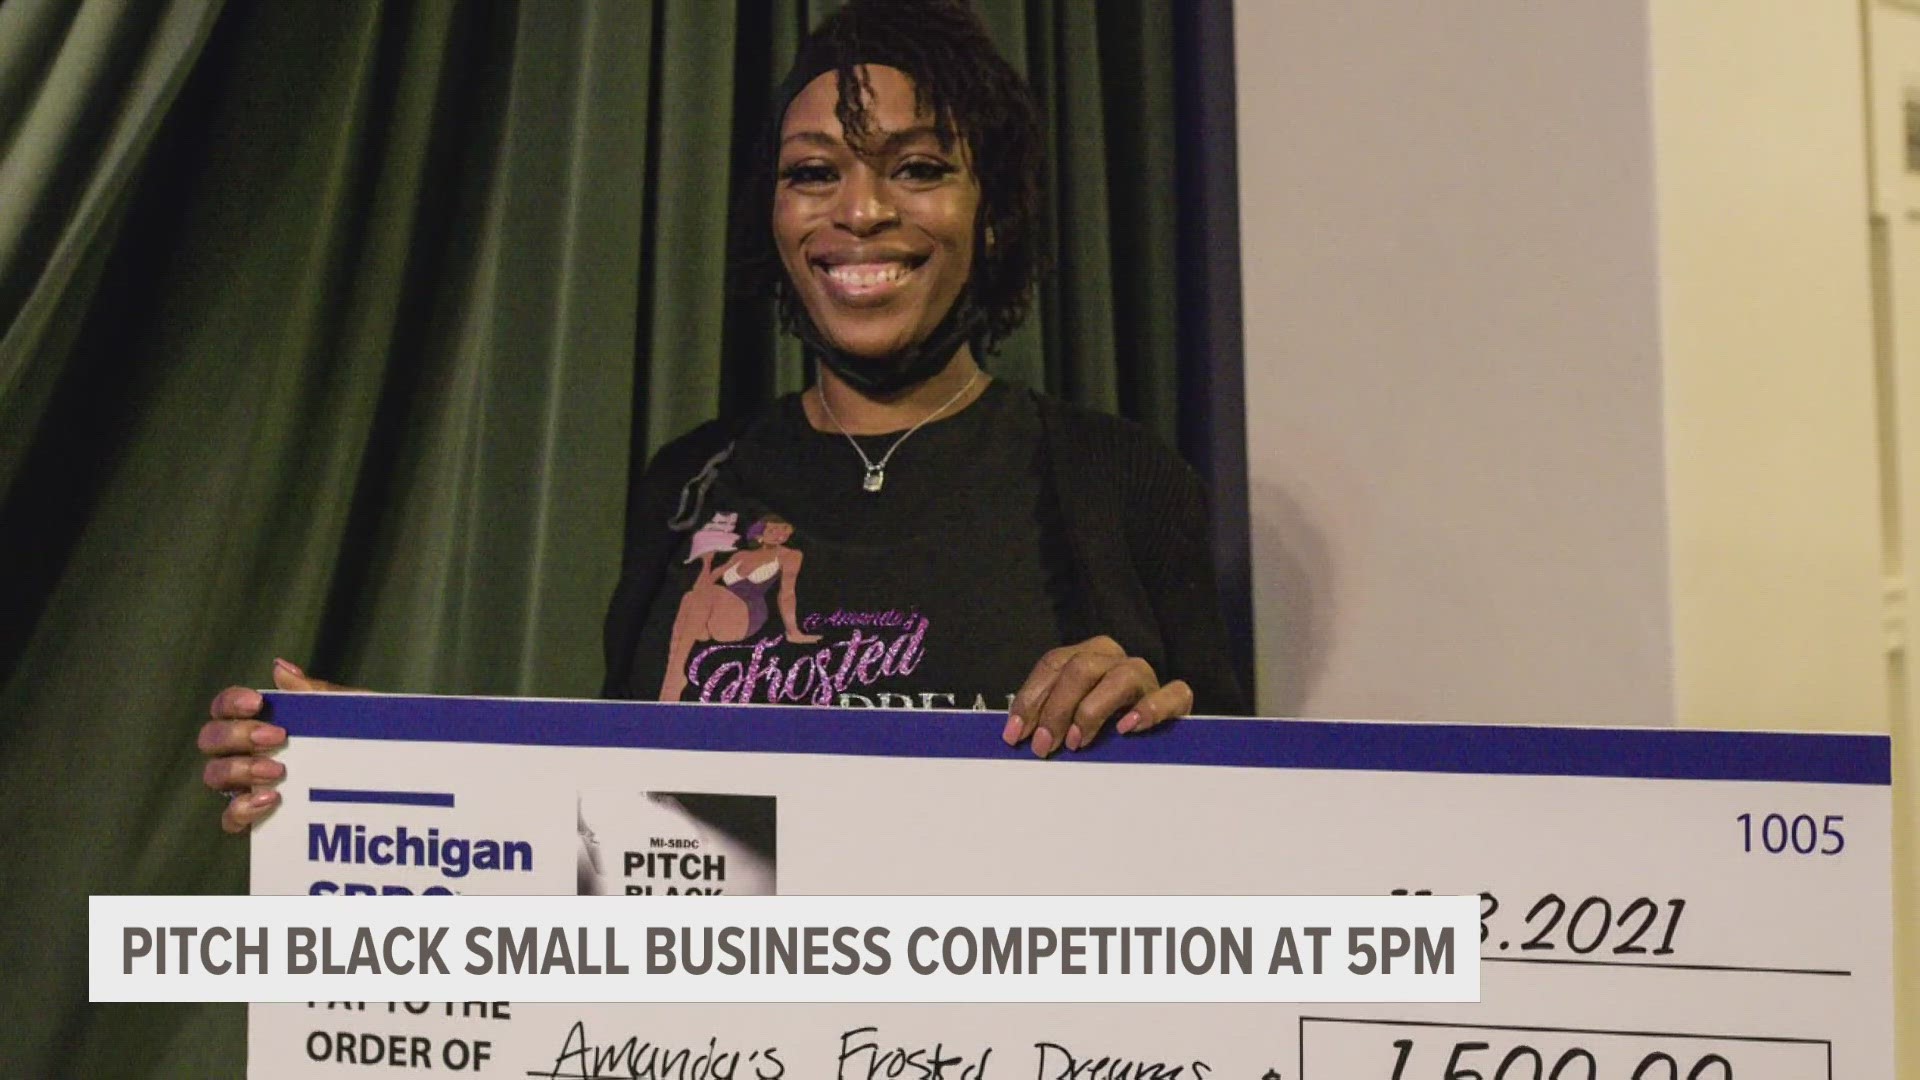 Pitch Black was created in response to the detrimental effects the pandemic has had on small businesses, particularly Black-owned businesses.